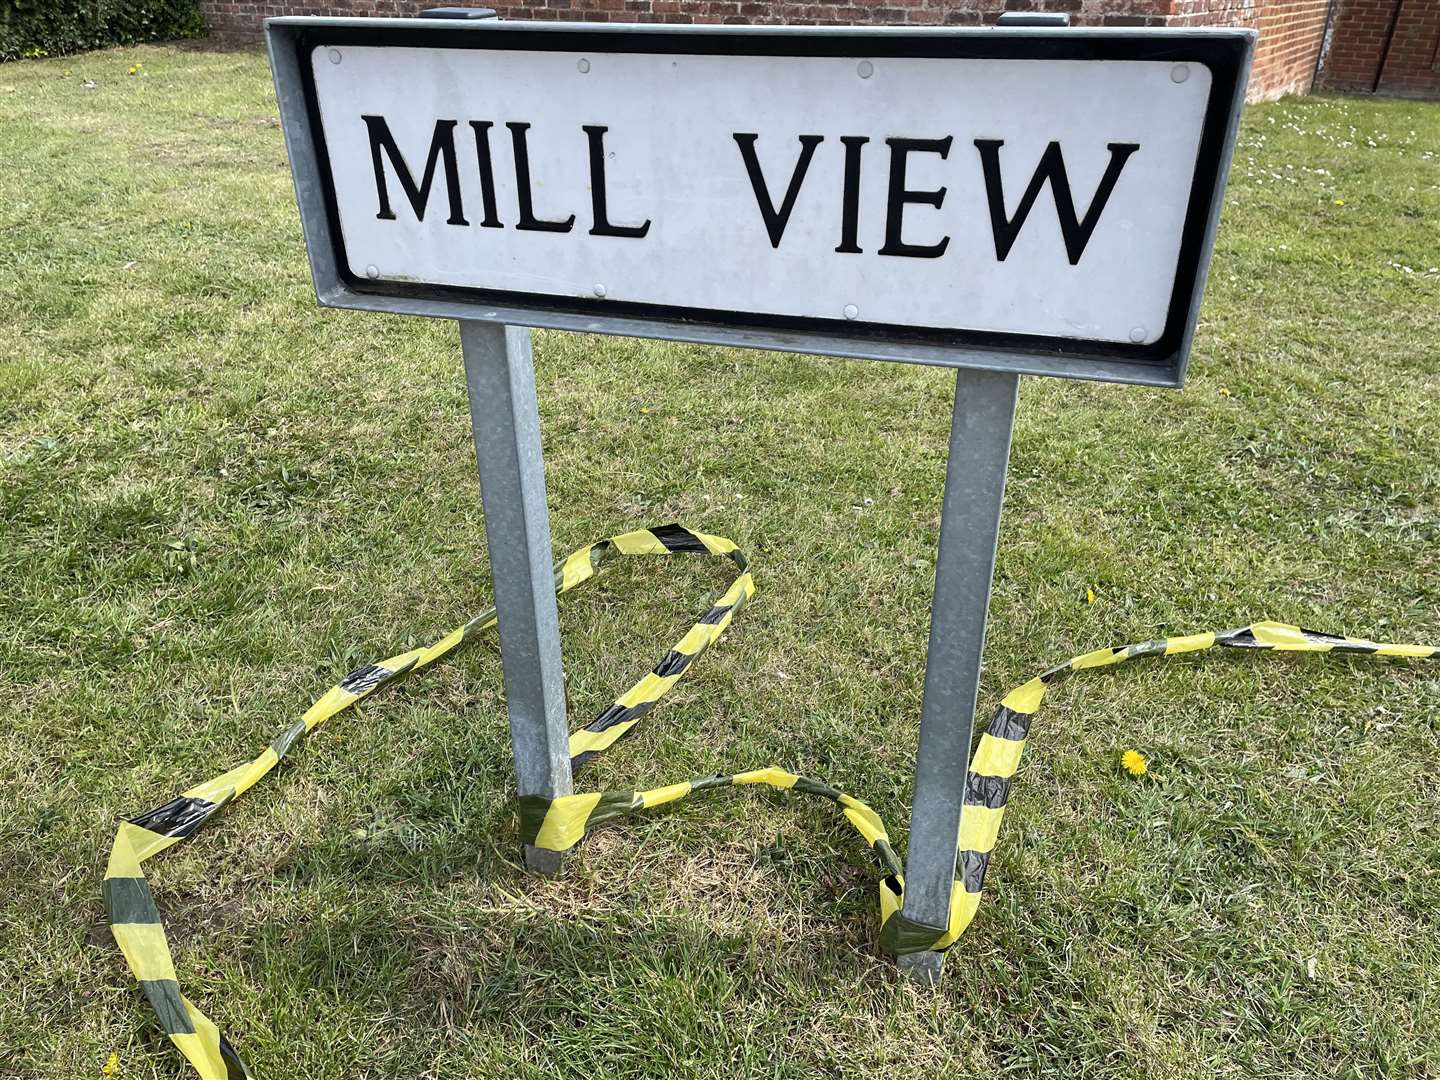 It has now been a week since the blast in Mill View